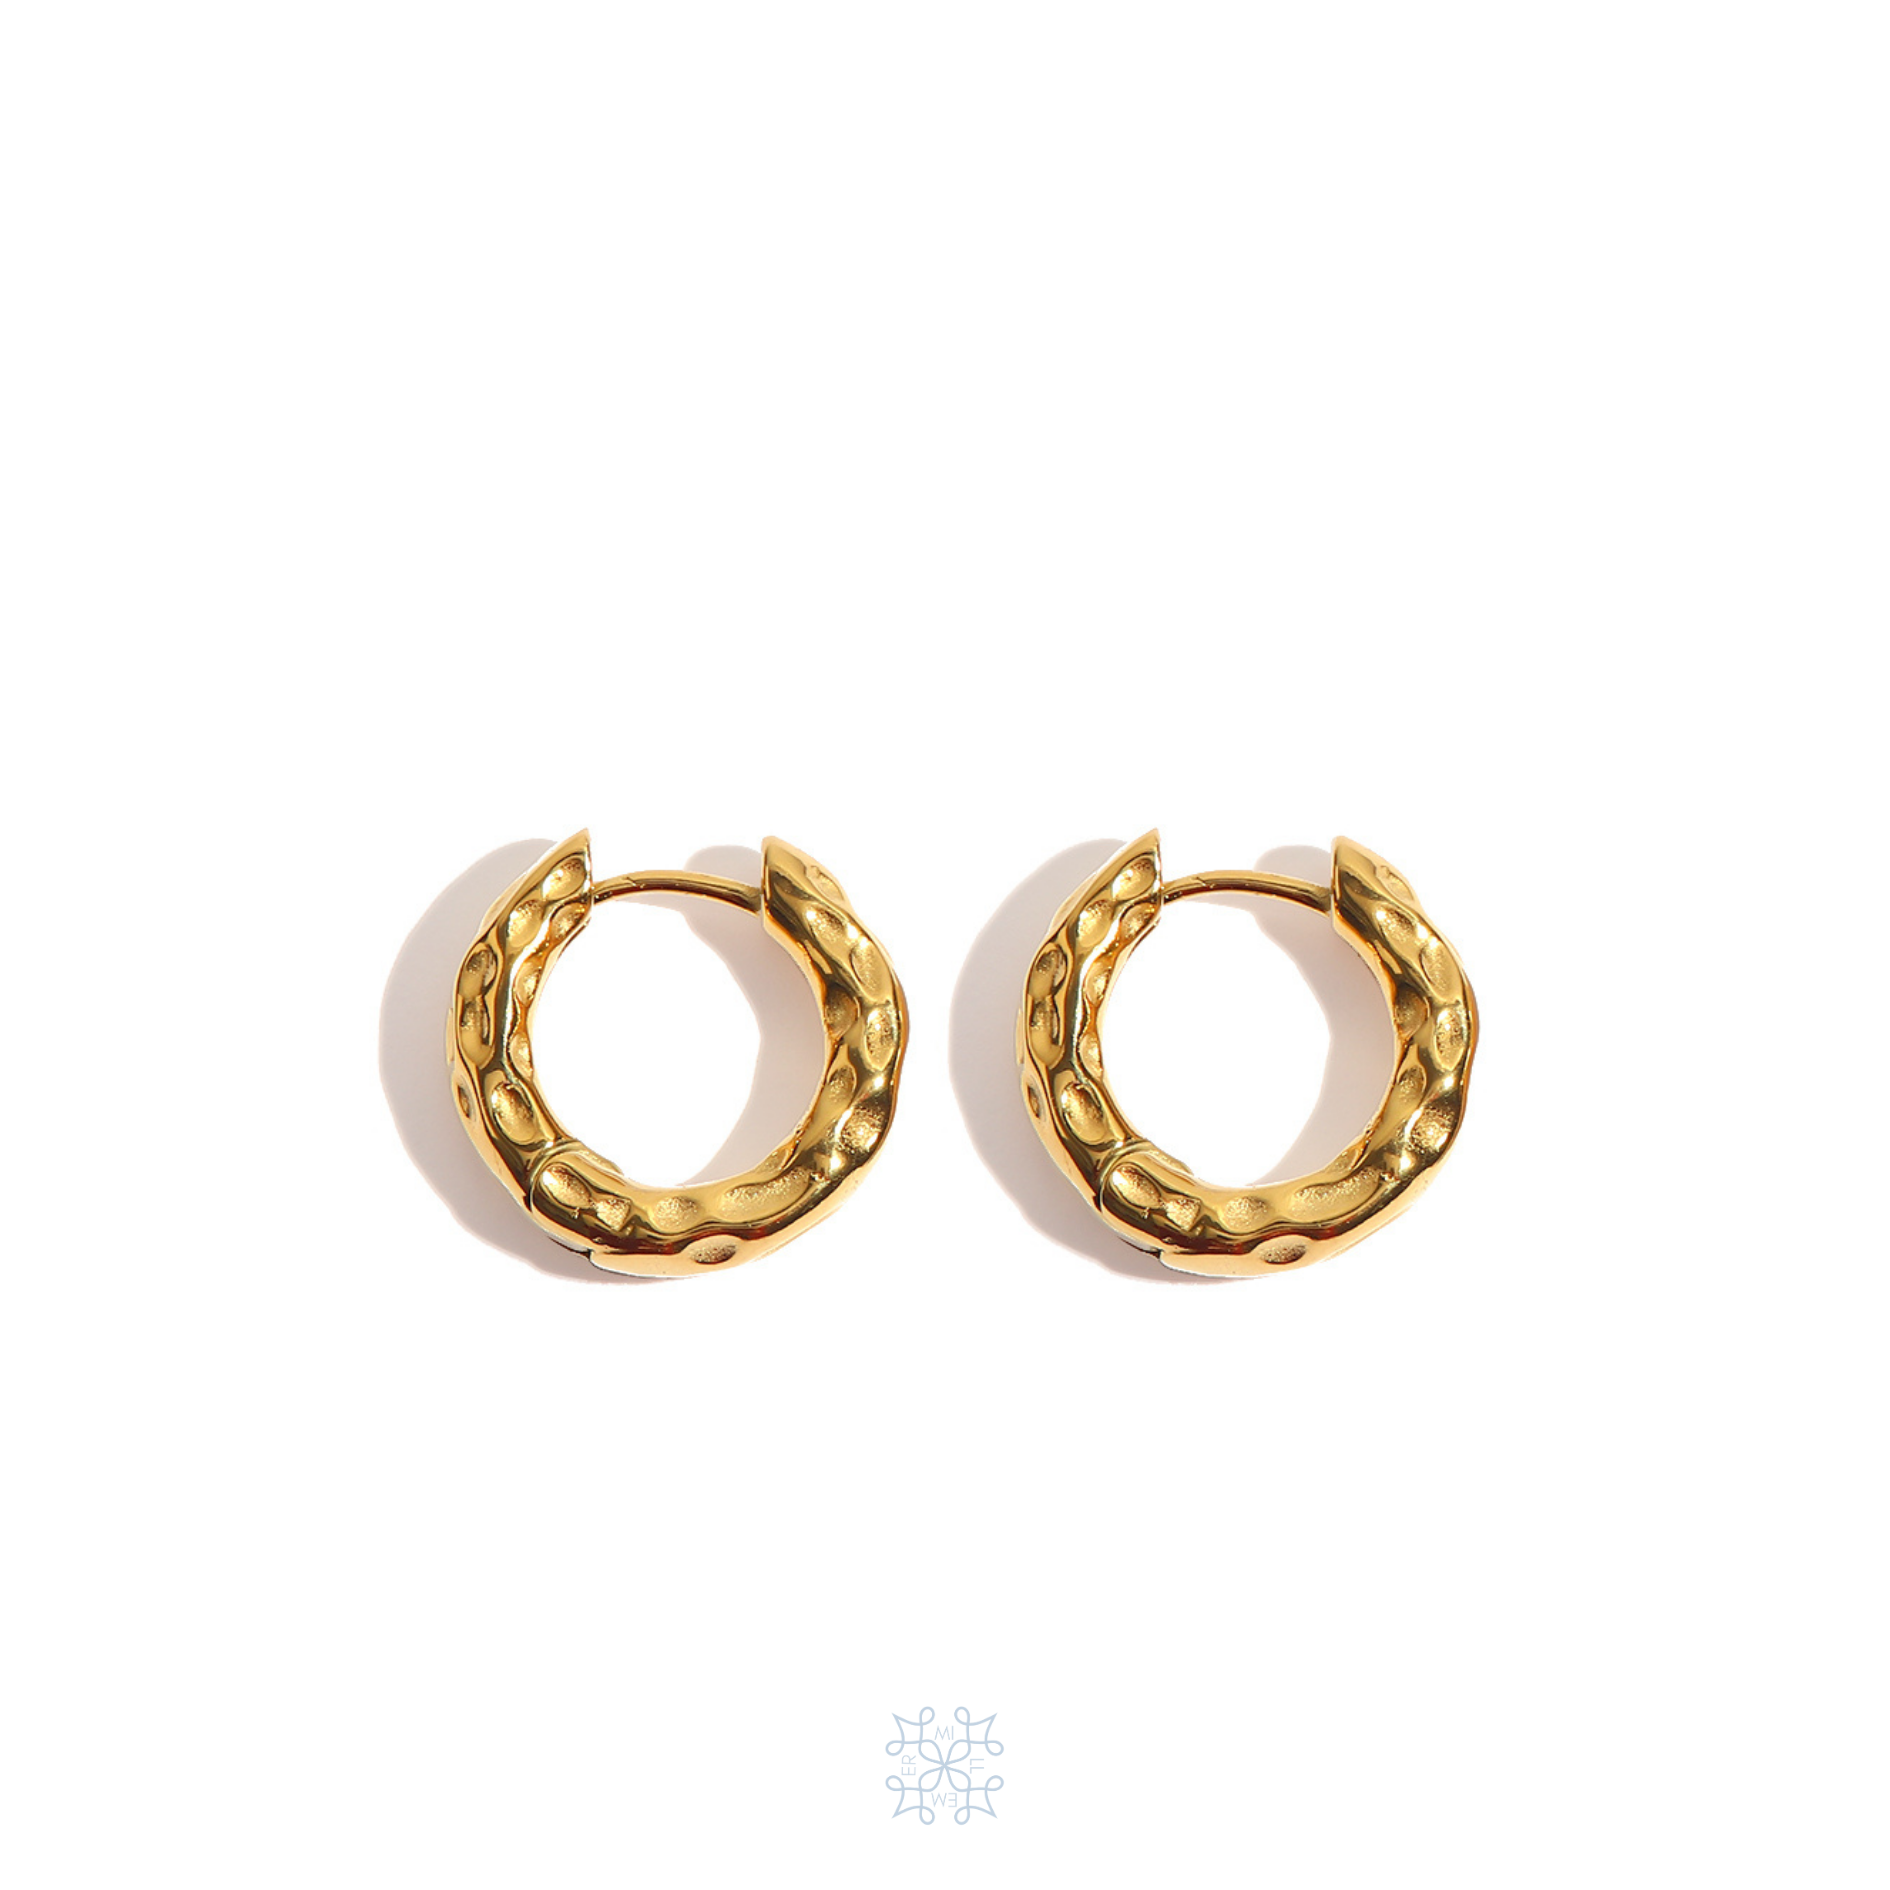 Gold Huggies Earrings, Hoop circle earrings with irregilar border texture. The surface texture Resembles waterdrops on the sand. 